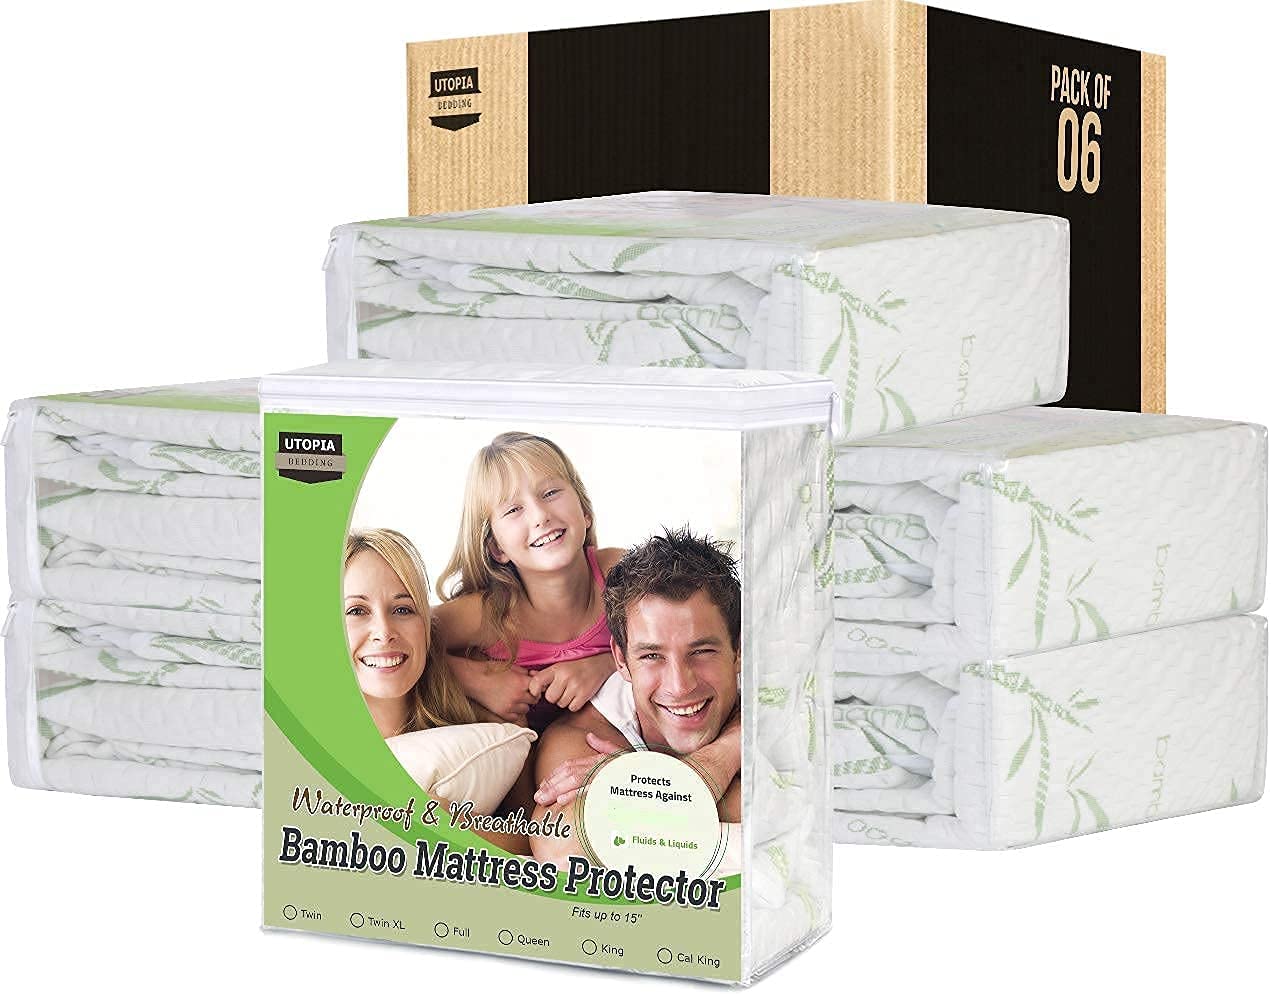 Utopia Bedding Premium Bamboo Waterproof Mattress Protector Full 340 GSM,  Fits 15 Inches Deep, Easy Care 